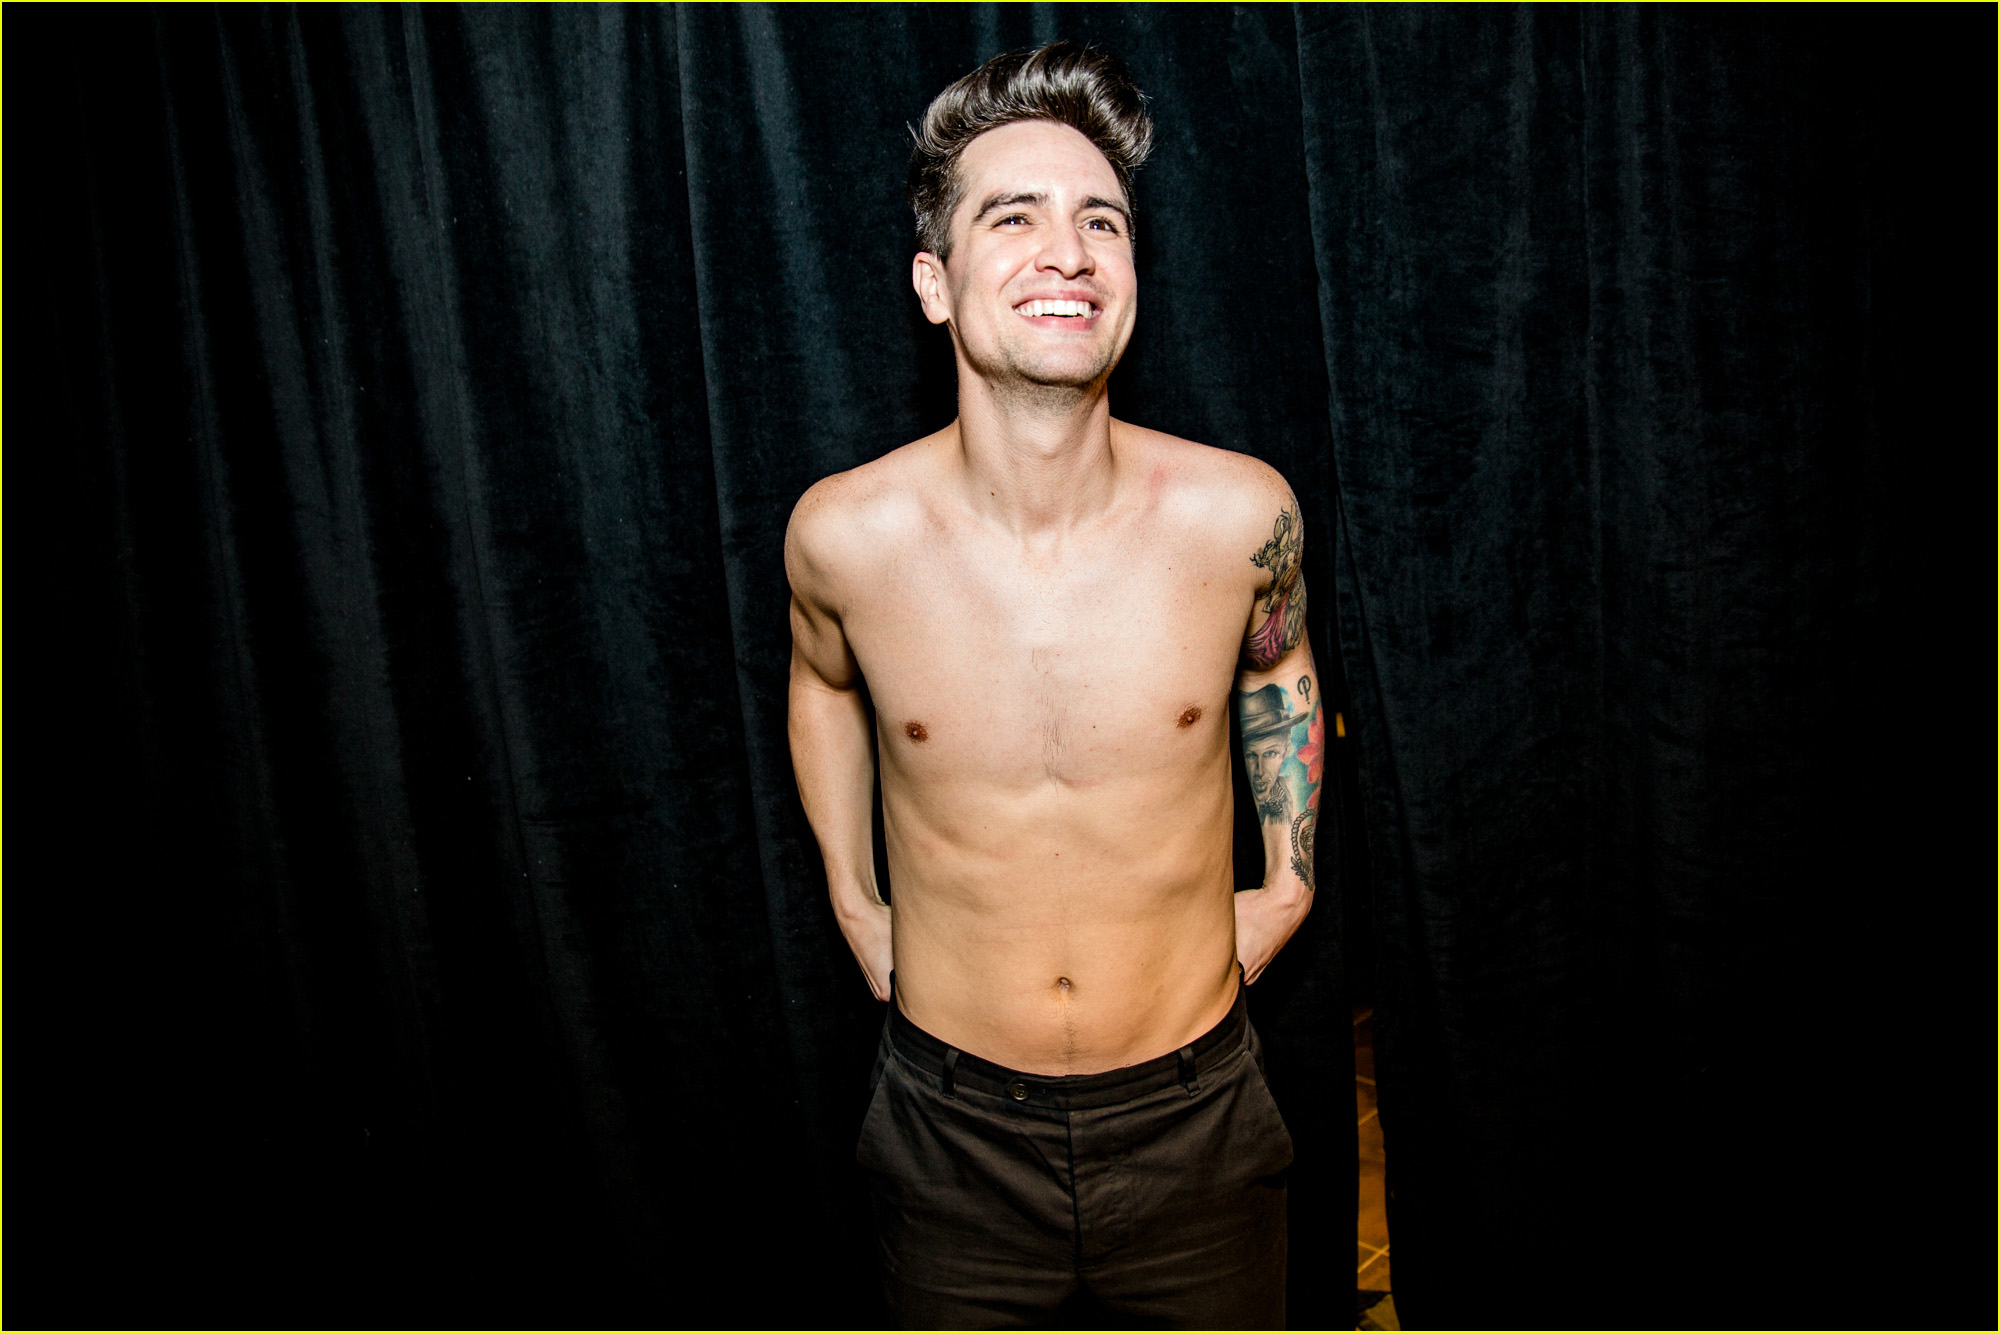 brendon urie looks so hot going shirtless backstage at iheartradio4151748